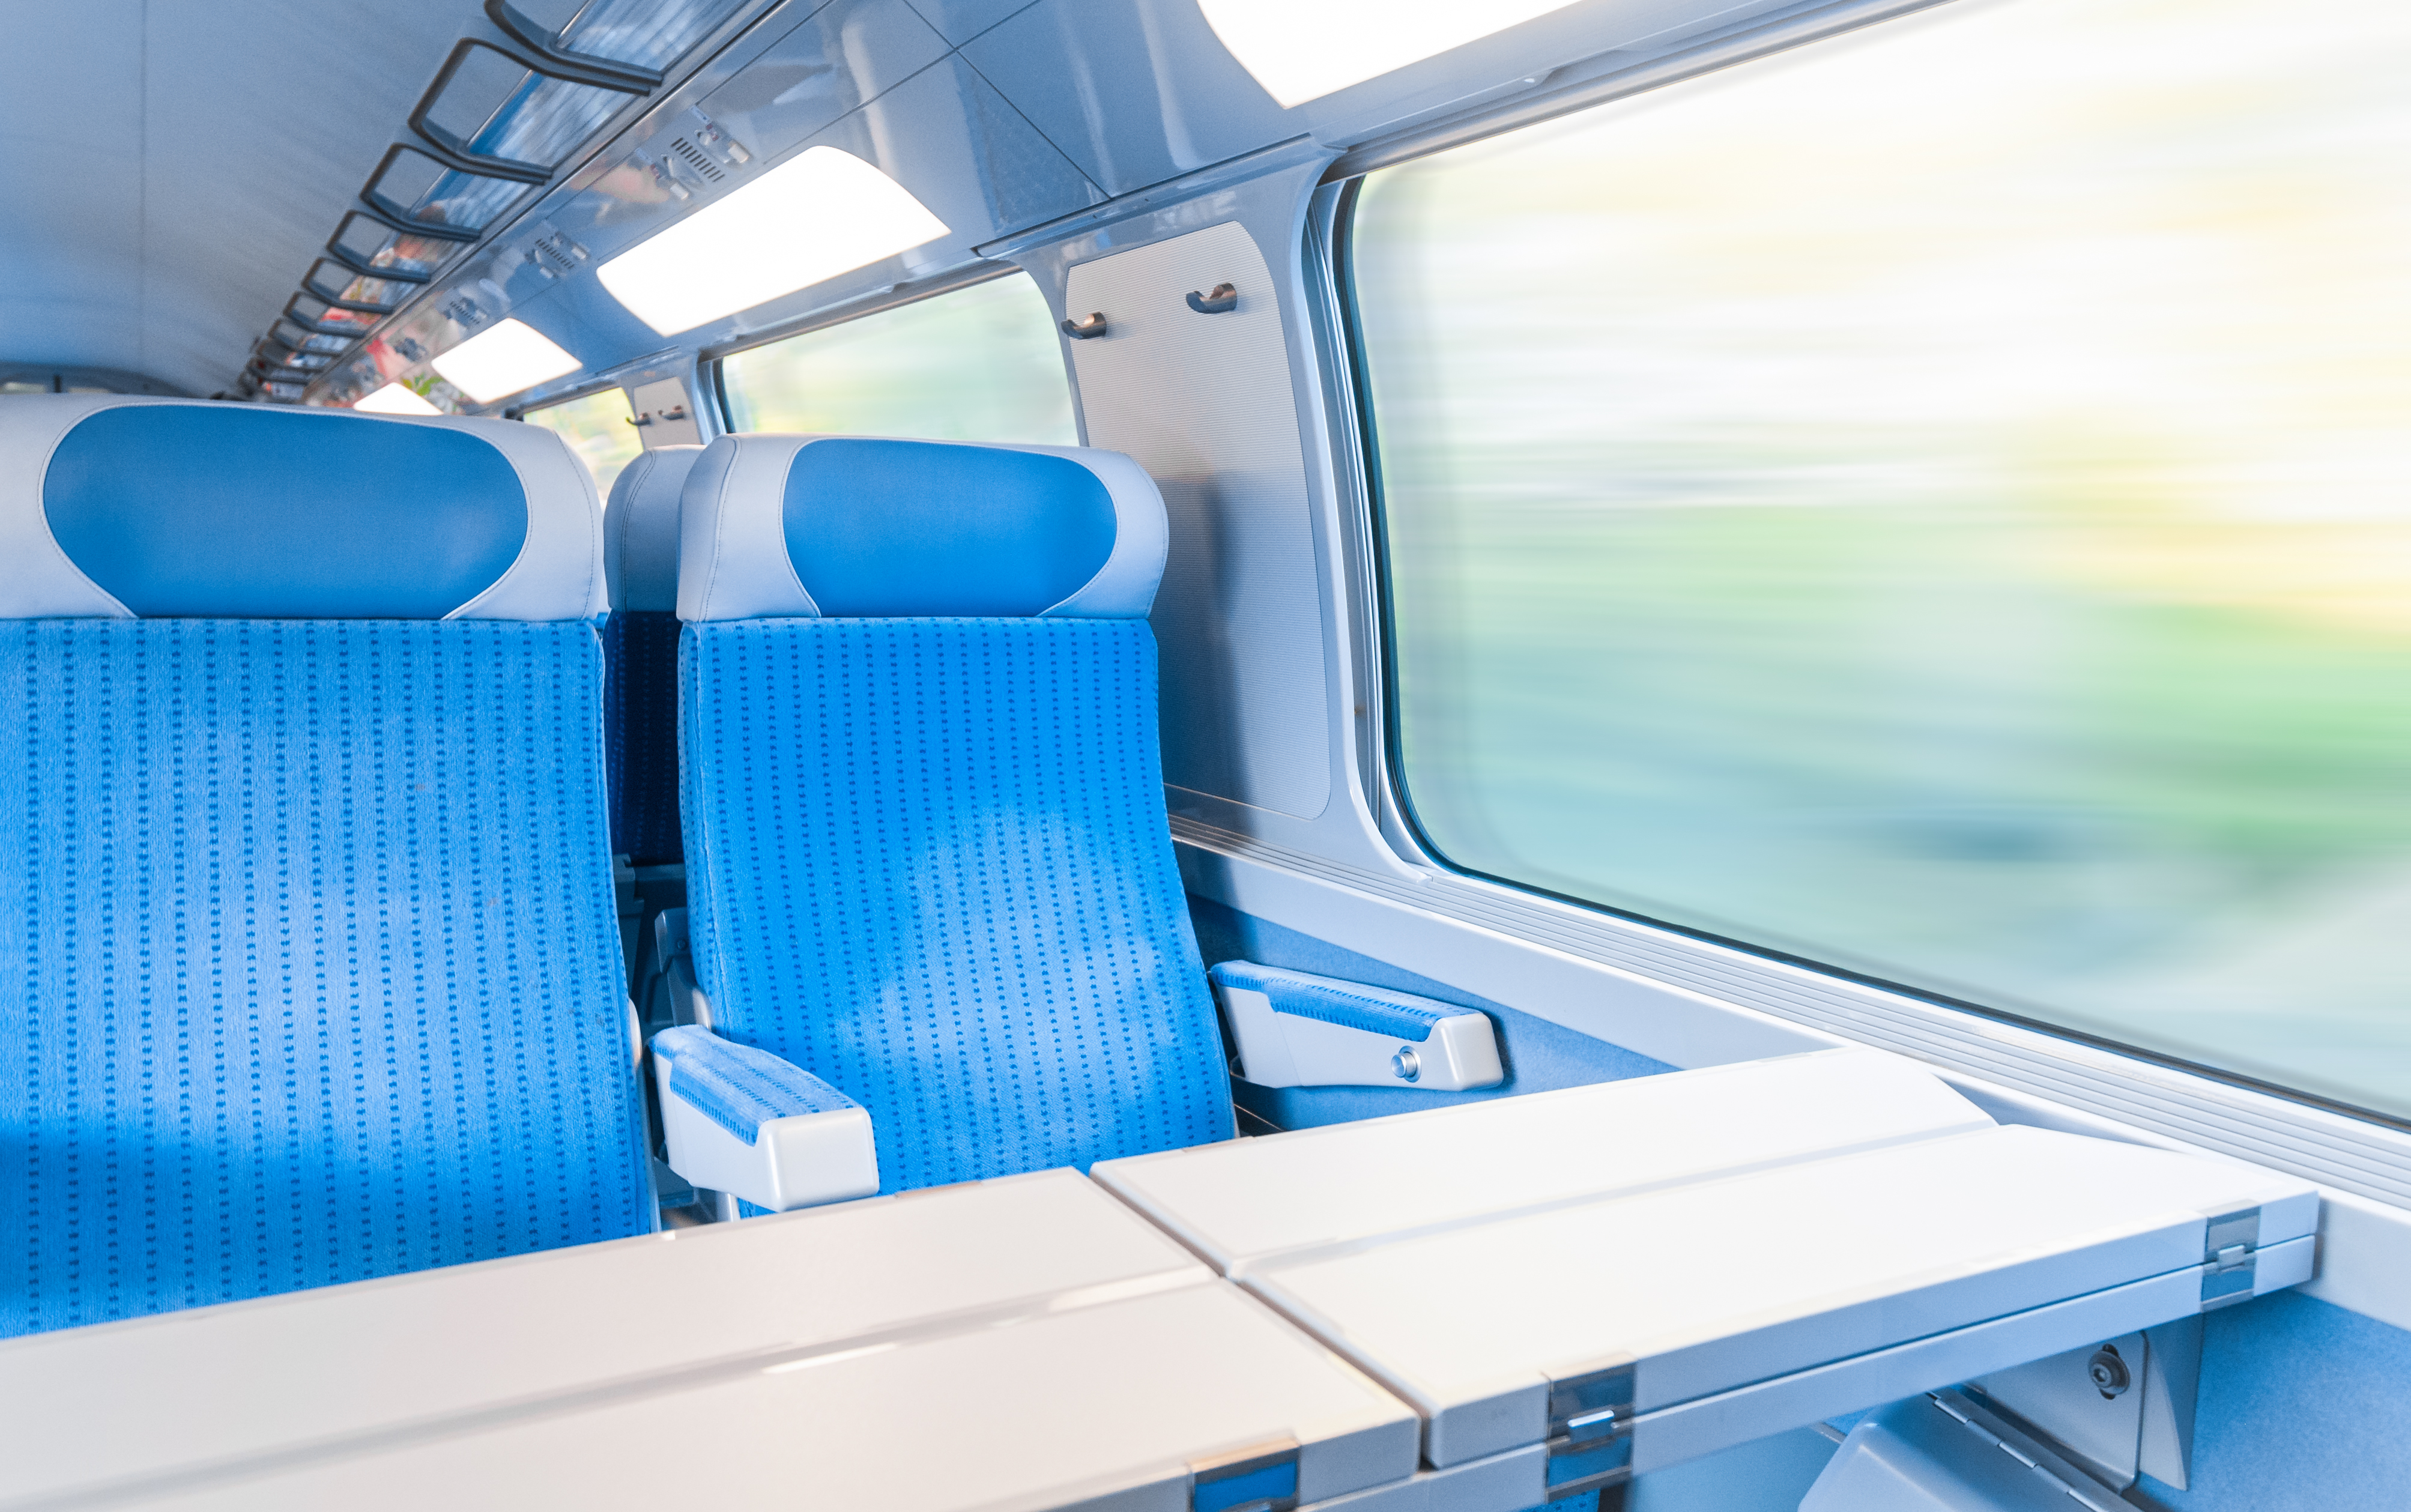 A window seat with a table on a train | Source: Shutterstock